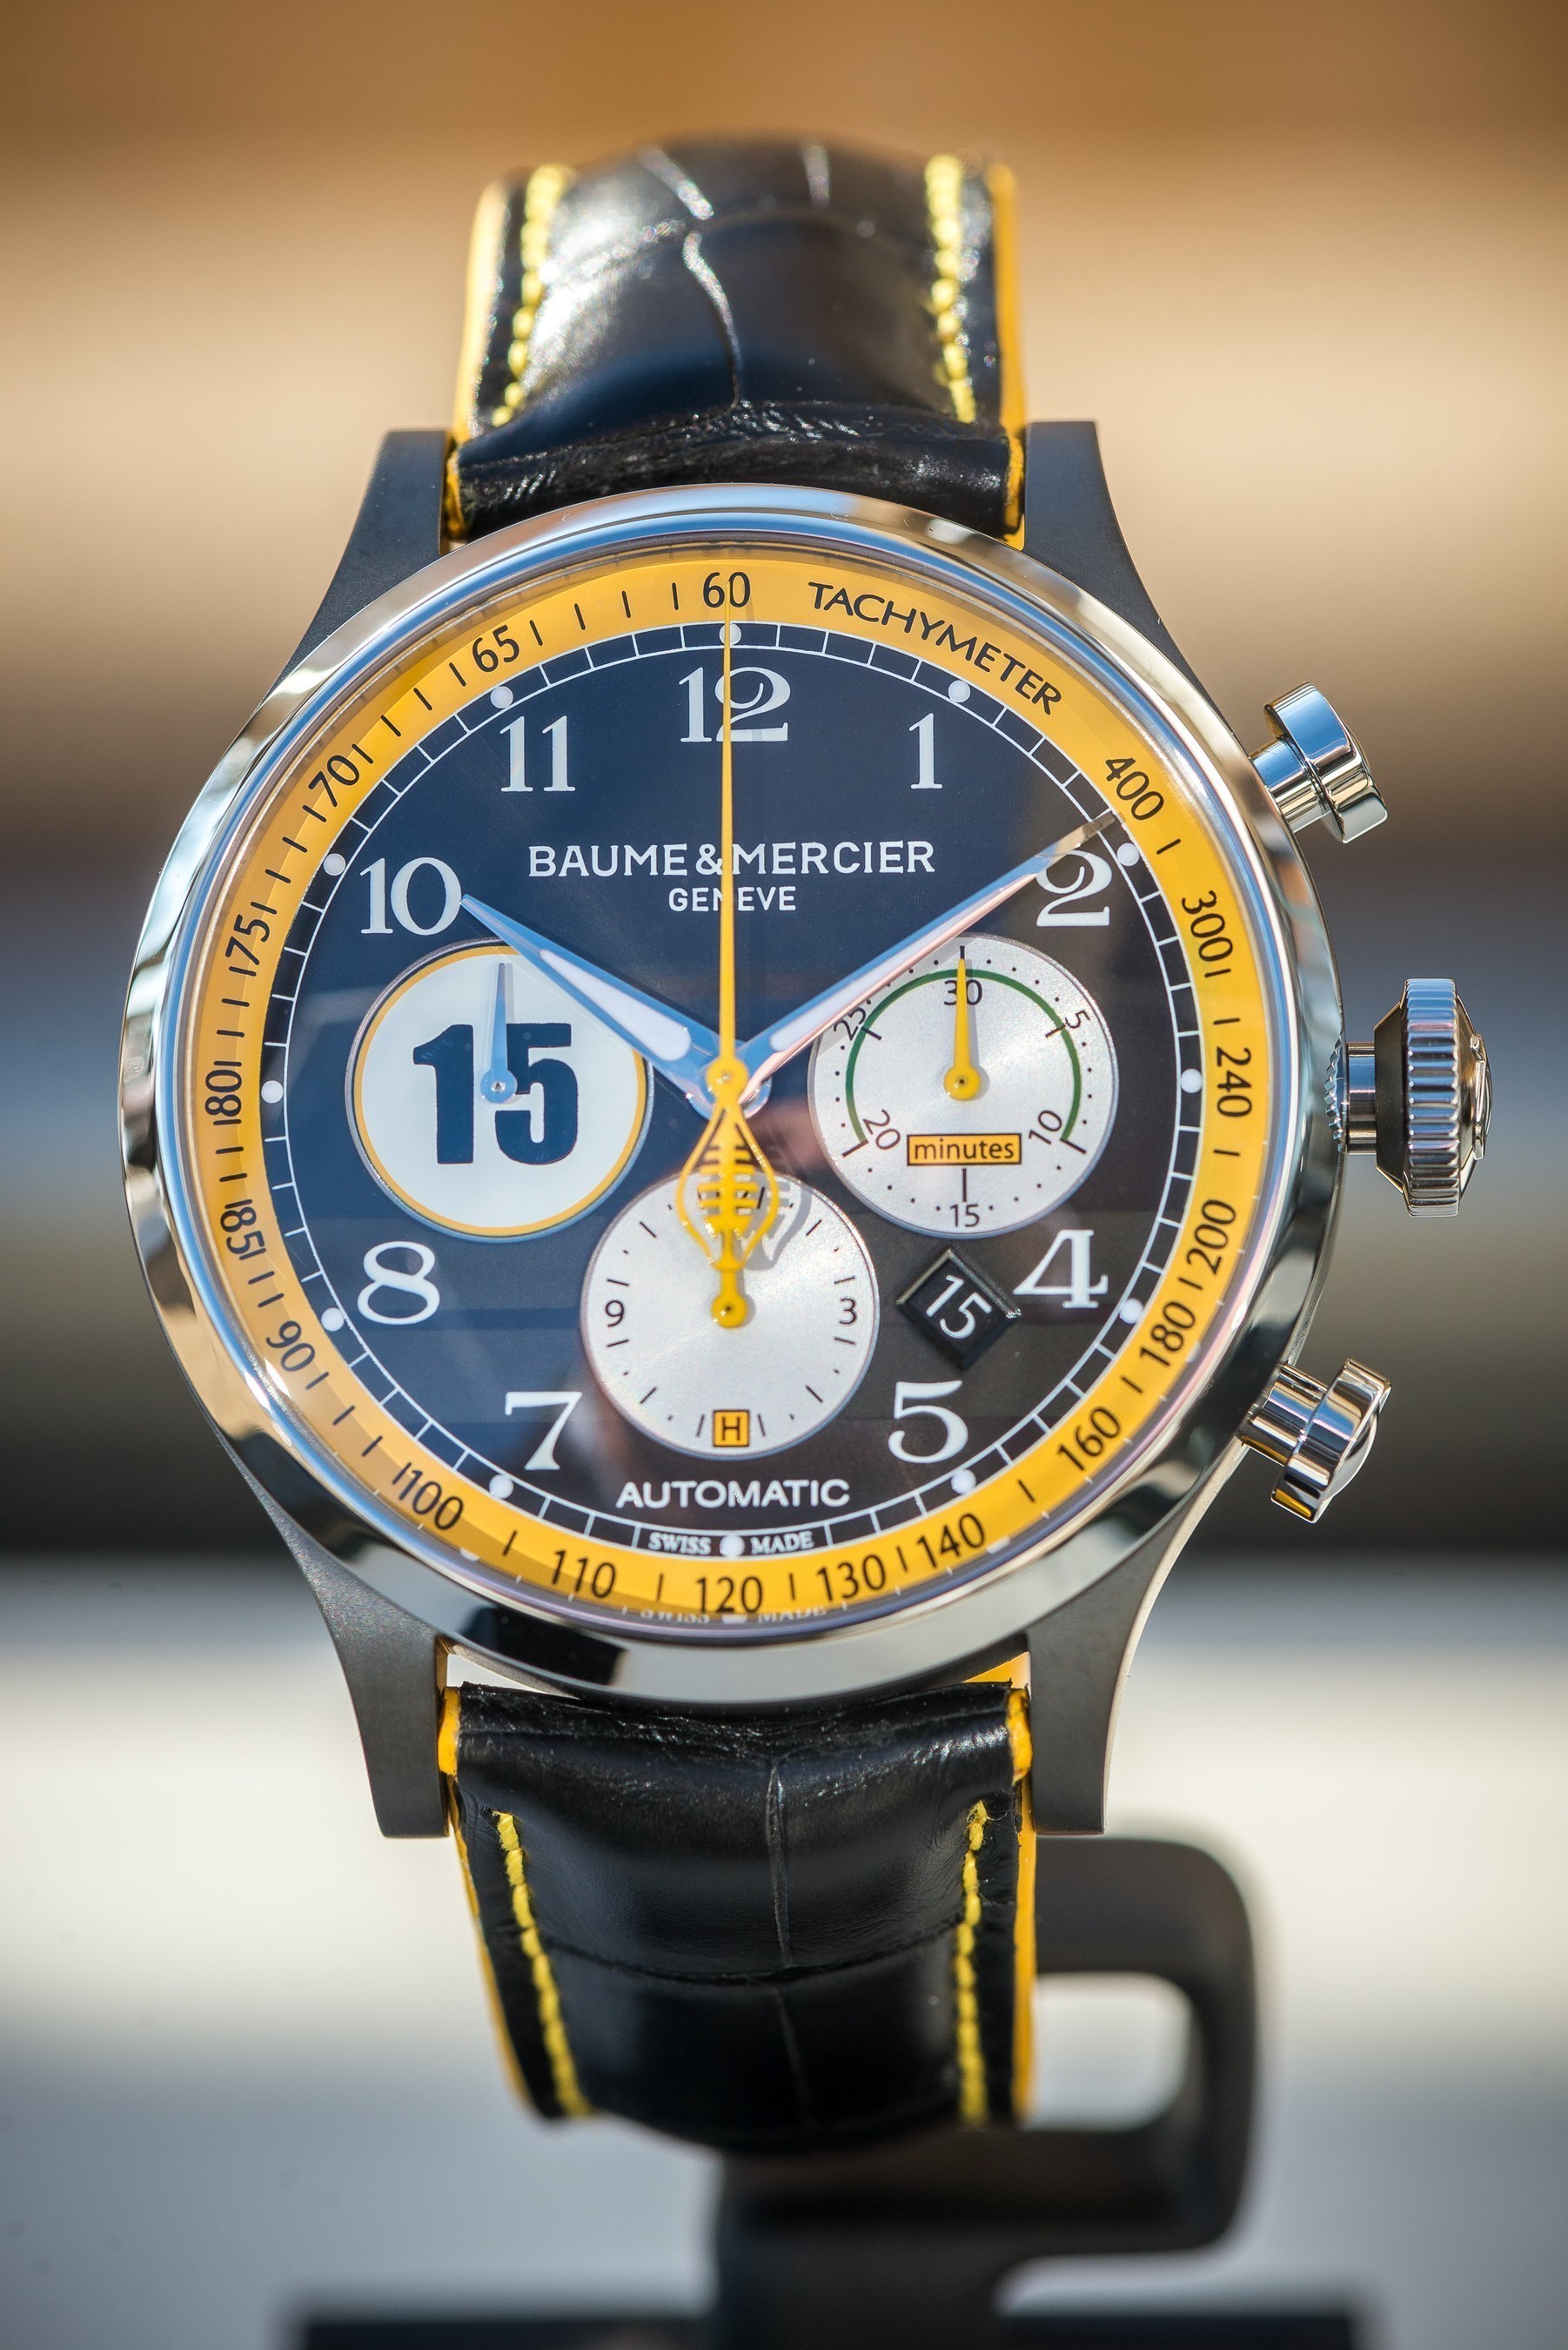 Last night, Baume & Mercier honored racecar drivers Dan Gurney (No. #15), Ken Miles (No. #50), Dave MacDonald (No. #97) and Allen Grant (No. #96) with a watch displaying their distinct racecar number as well as incorporating aesthetic elements of the Cobra 289 racecar.  Only 15 of each of the four limited edition Legendary Driver Capeland Shelby(R) Cobra chronographs will be available worldwide (No. #15 shown here). For more information about Baume & Mercier, visit http://www.baume-et-mercier.com.